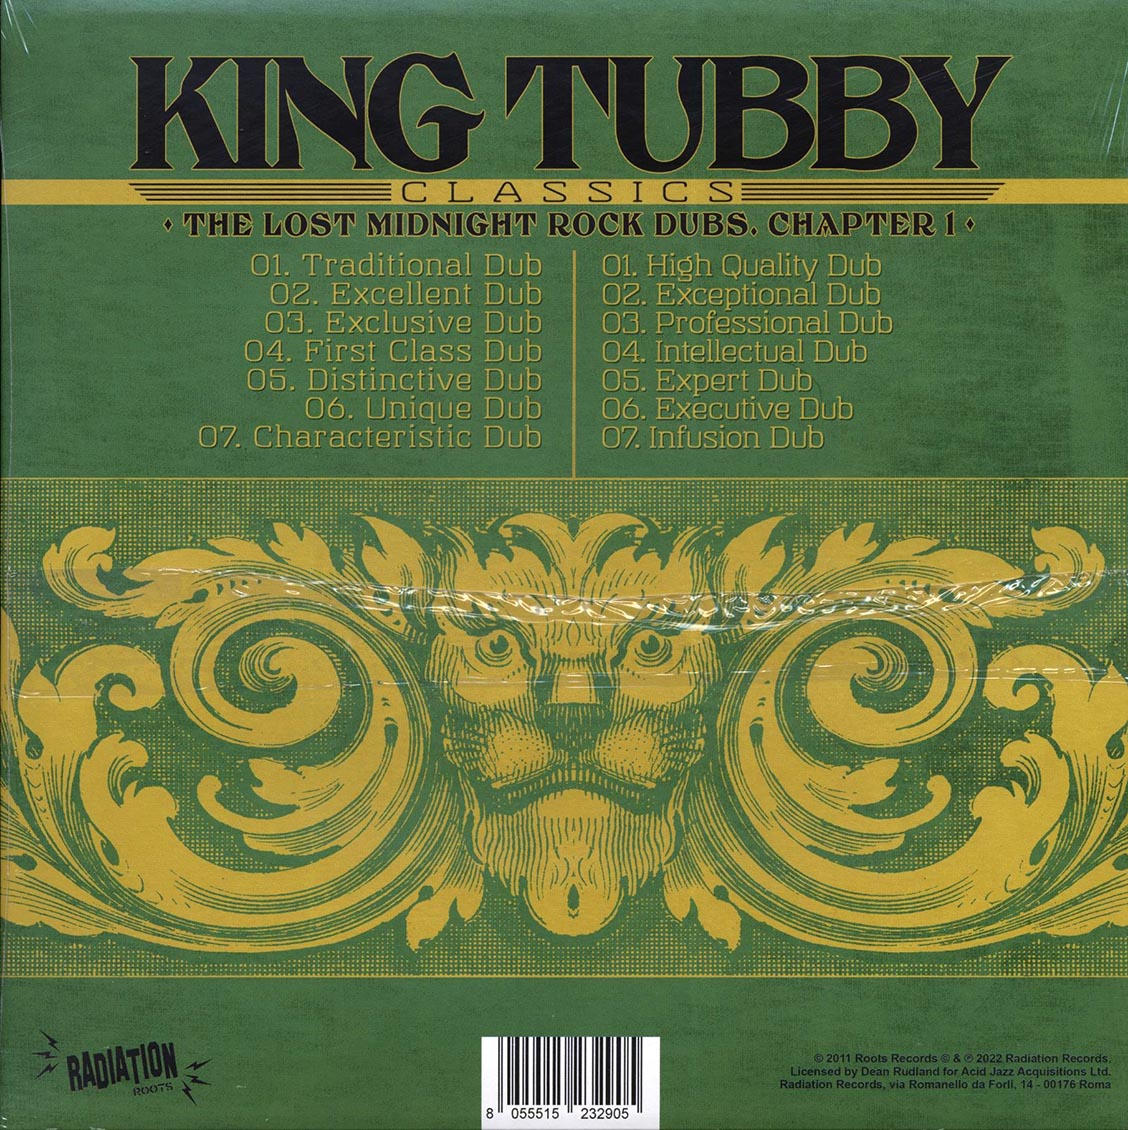 King Tubby's Classics: The Lost Midnight Rock Dubs Chapter 1